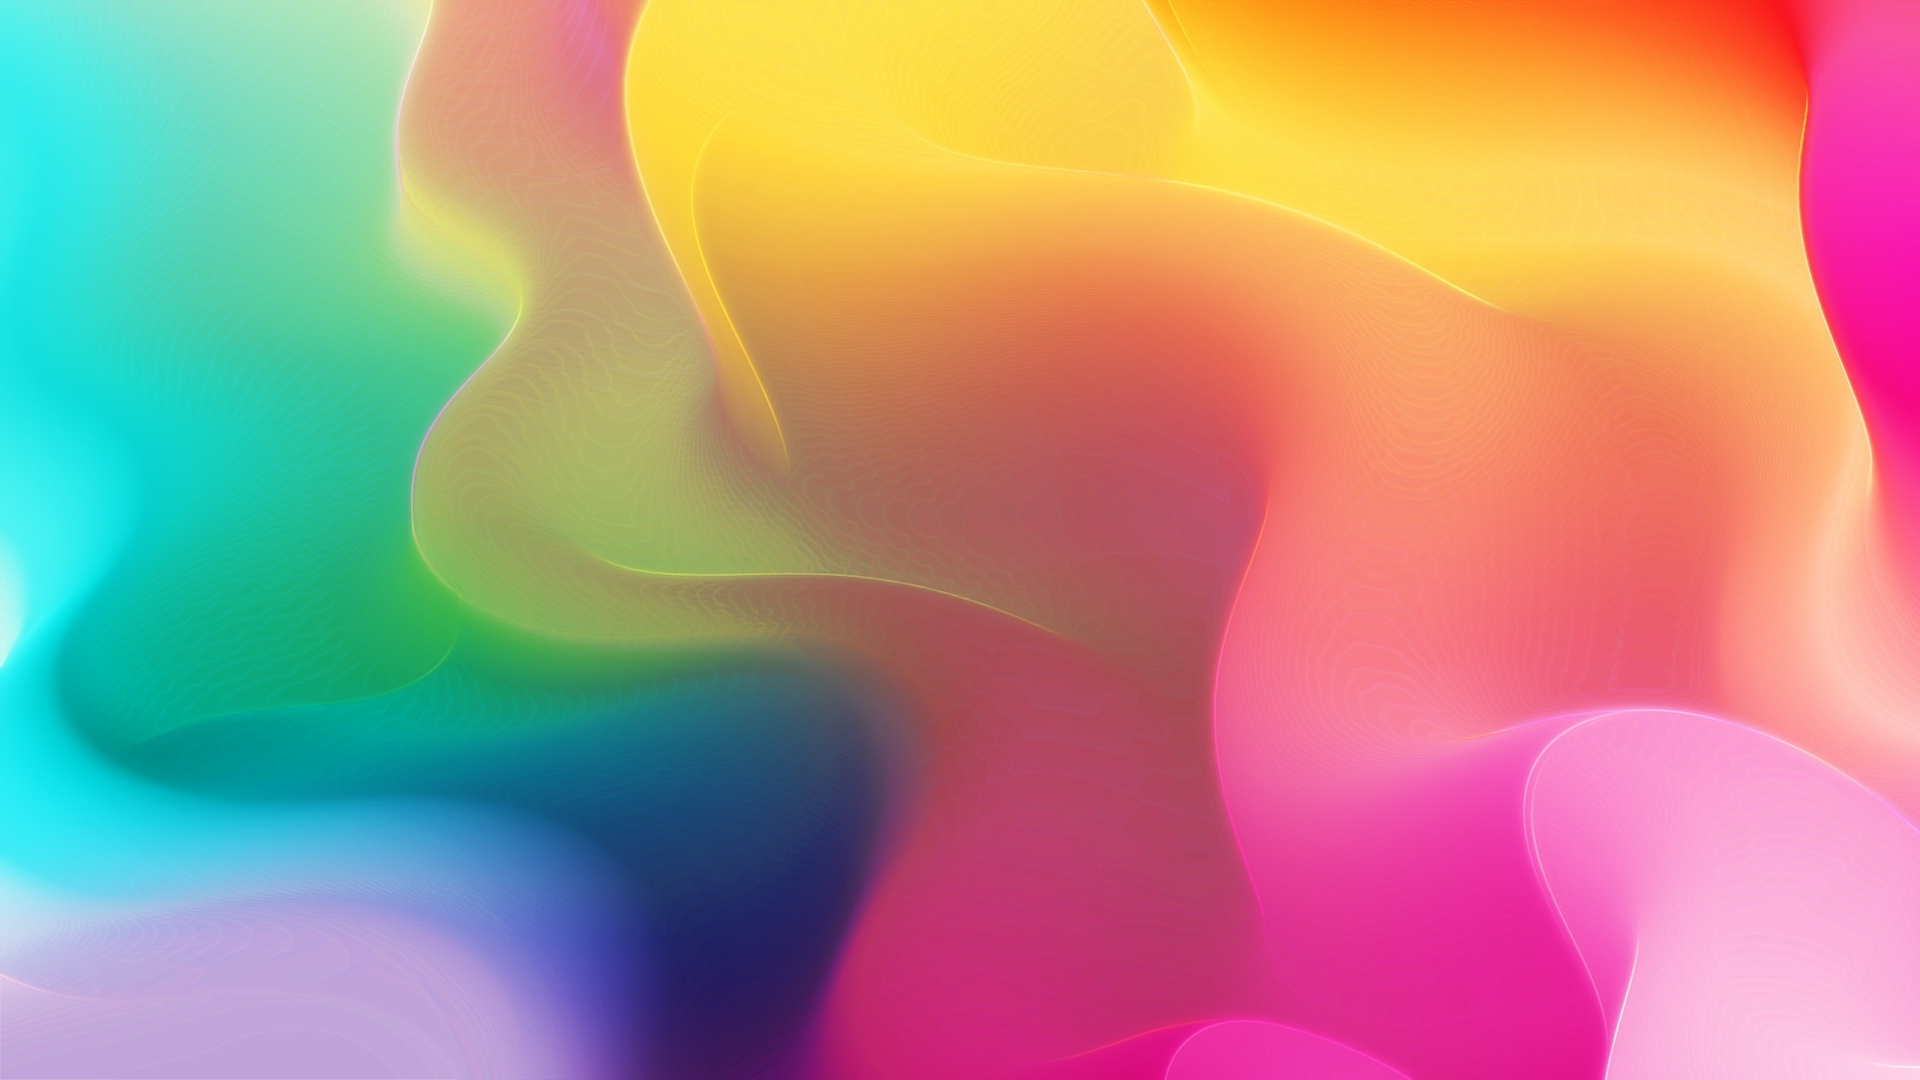 Download wallpaper 1920x1080 abstract, colorful, smooth gradient, full hd,  hdtv, fhd, 1080p wallpaper, 1920x1080 hd background, 23508